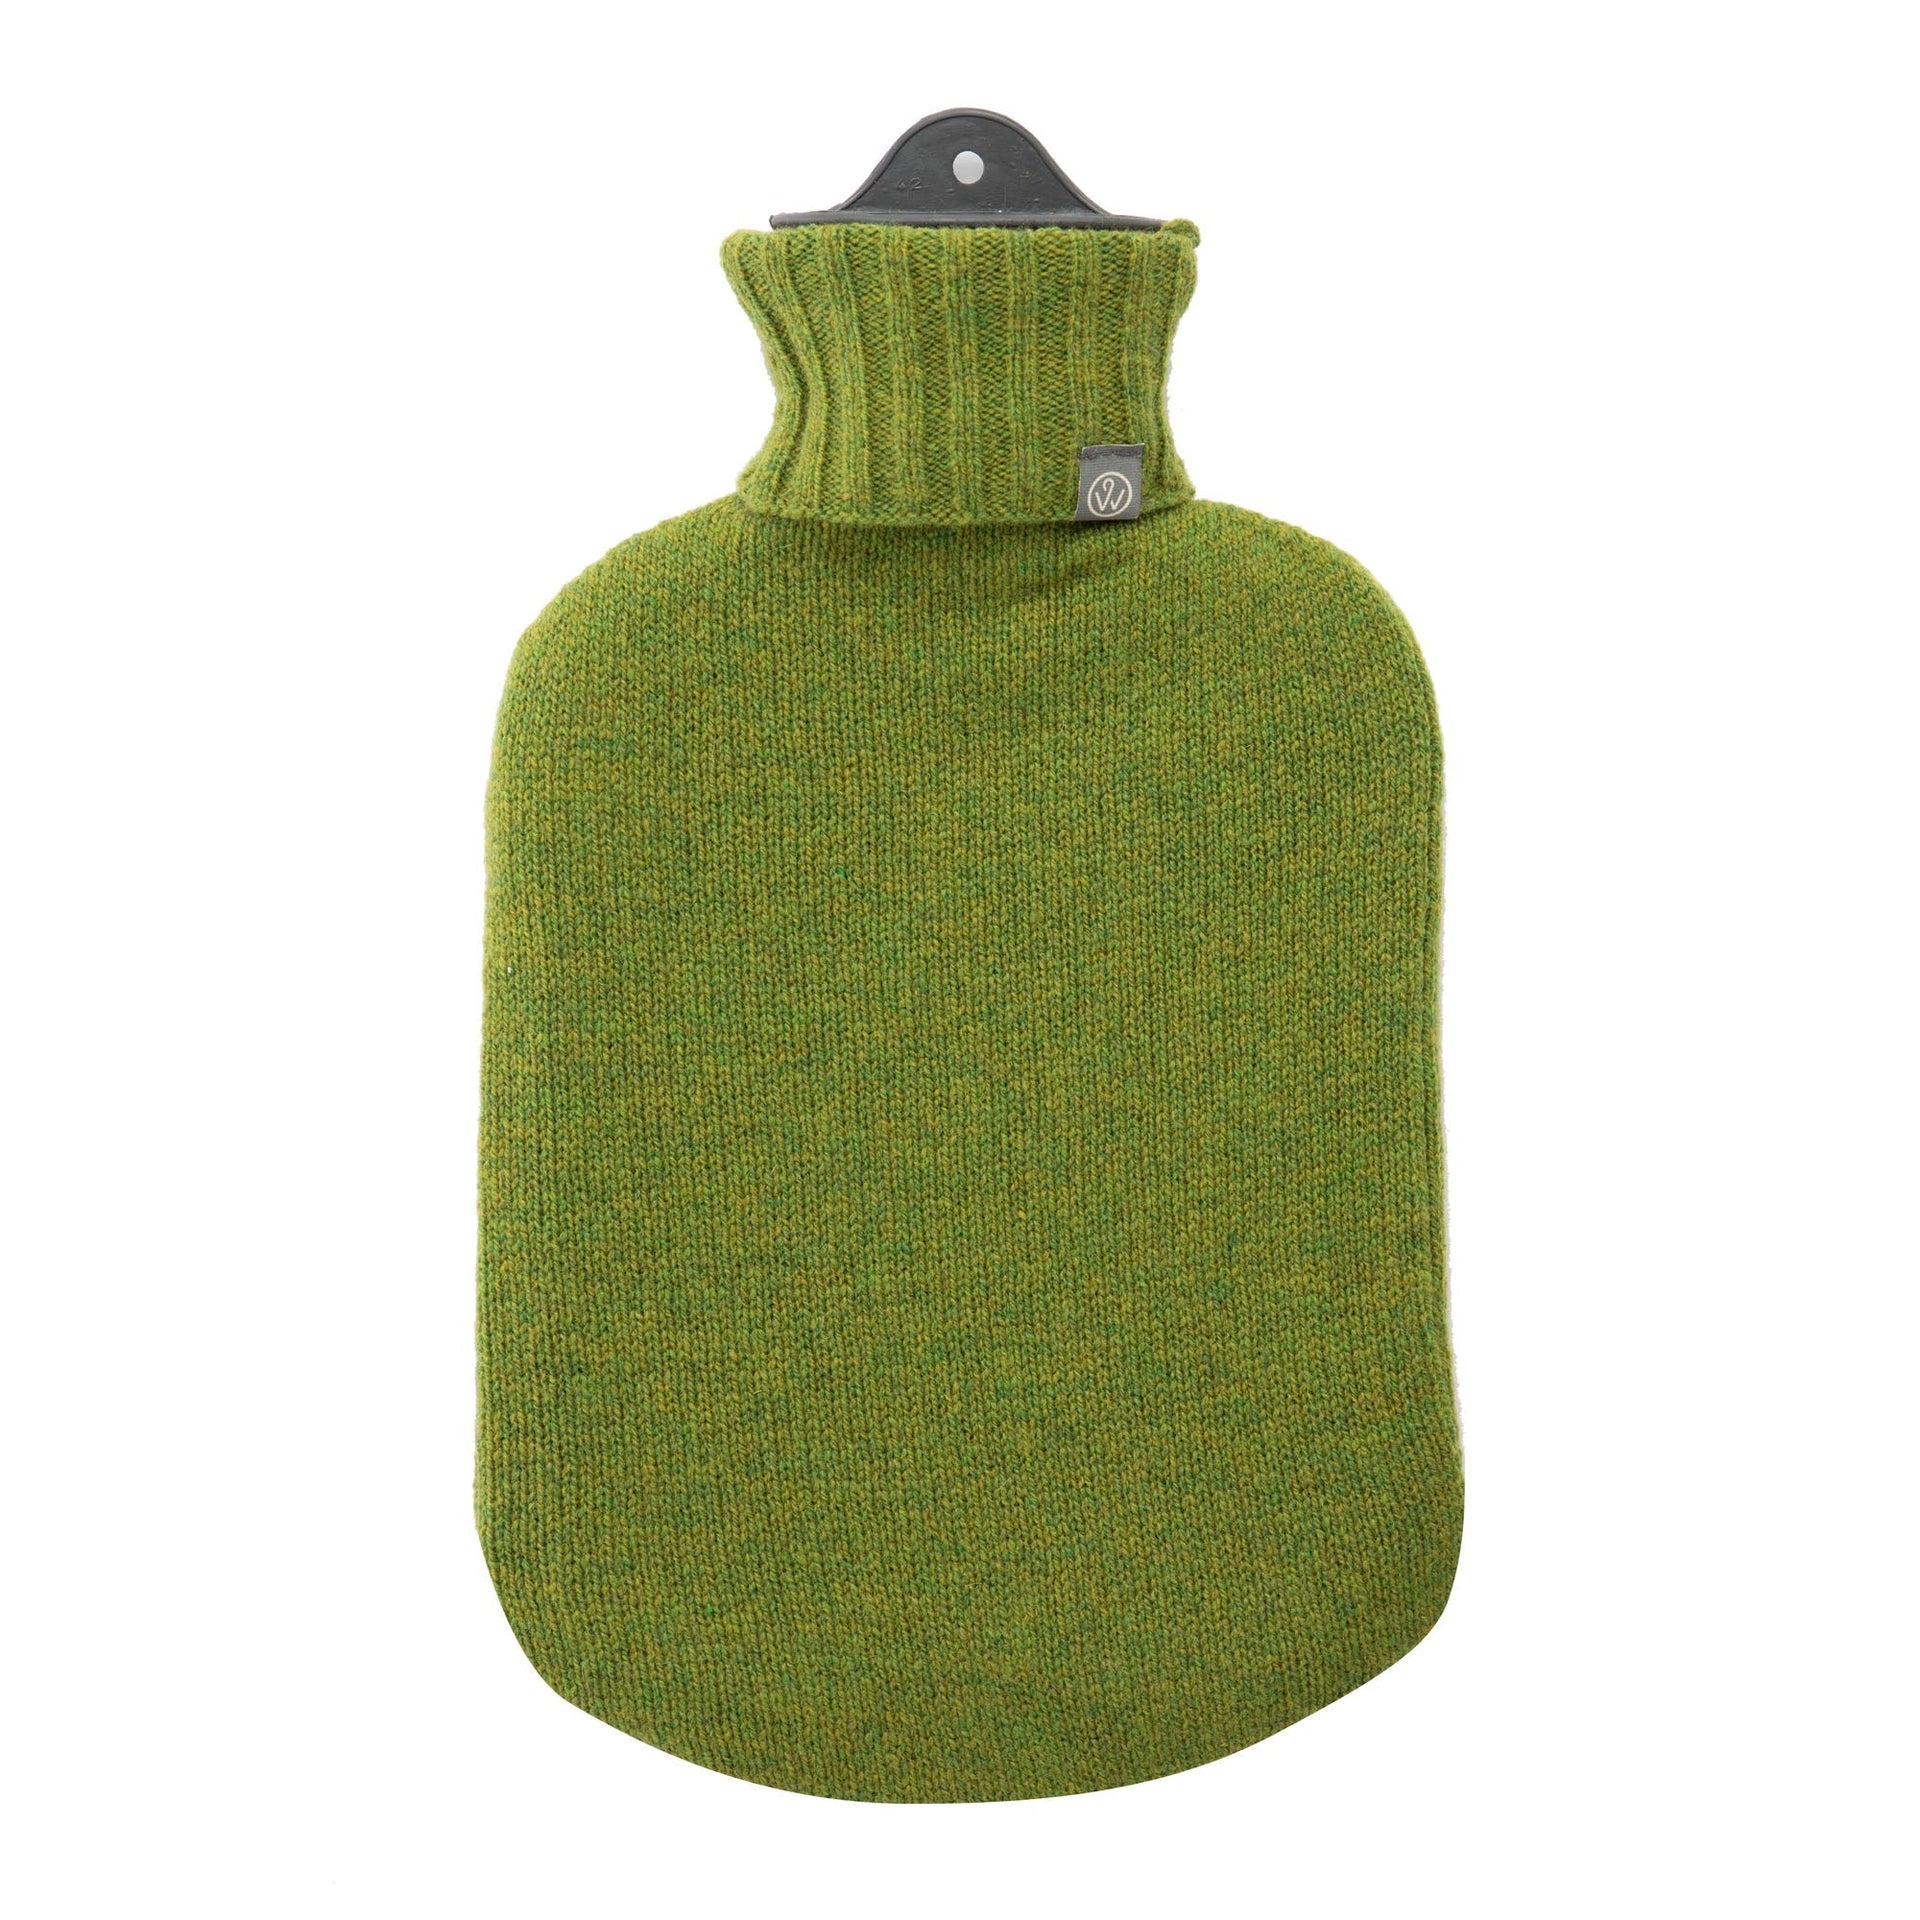 Lambswool Knit Block Colour Sustainable Hot Water Bottle Moss Green - Wairm - Made Scotland